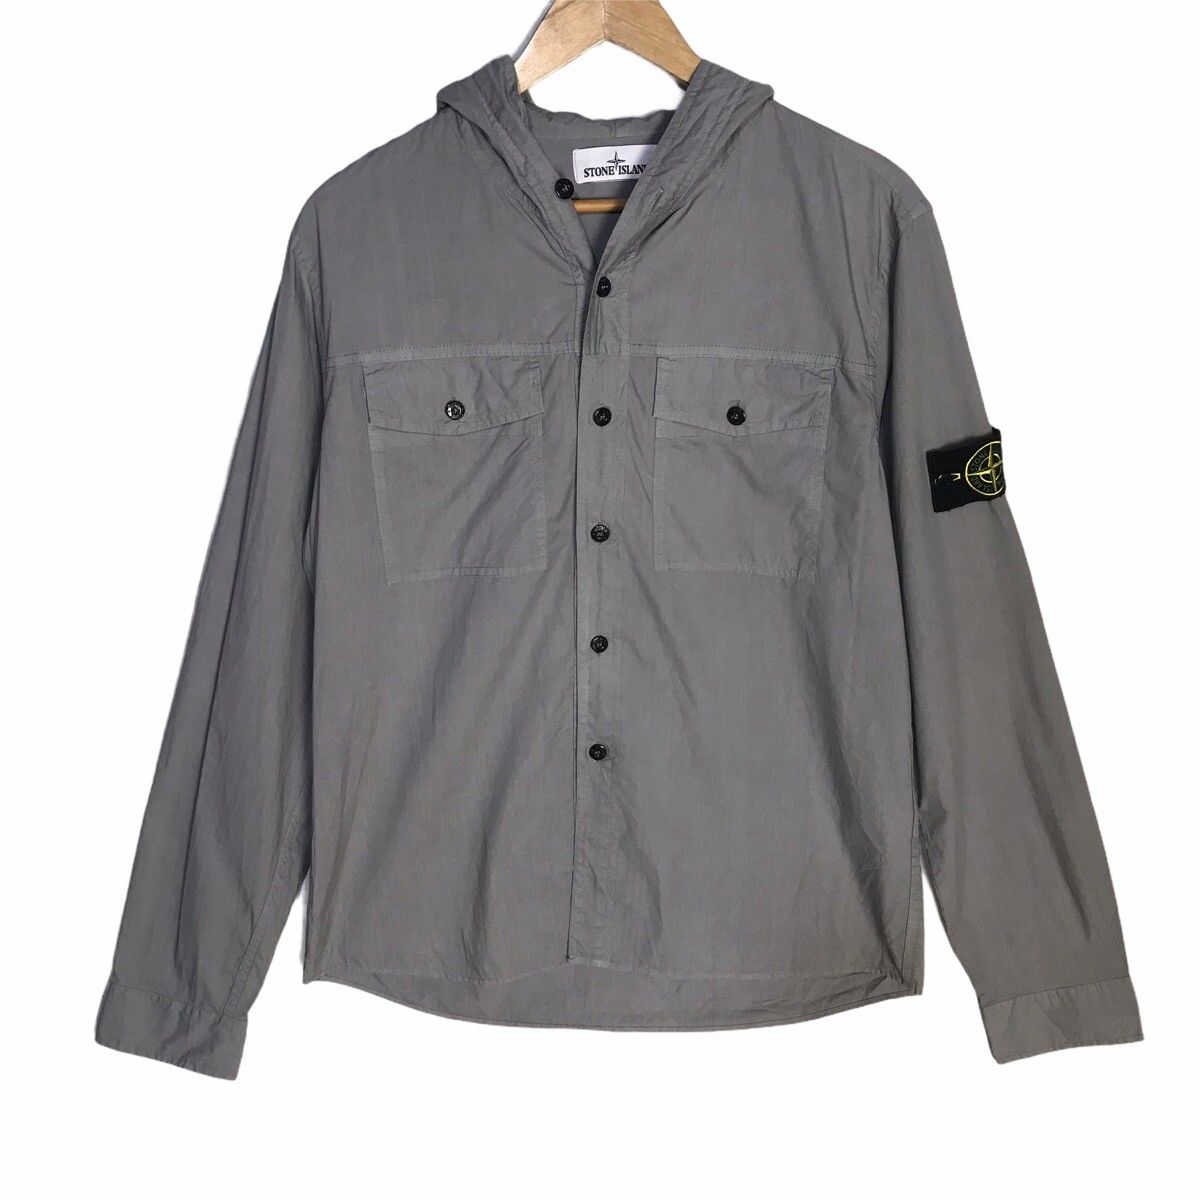 Stone island spring summer 2014 hooded button up shirt - 1